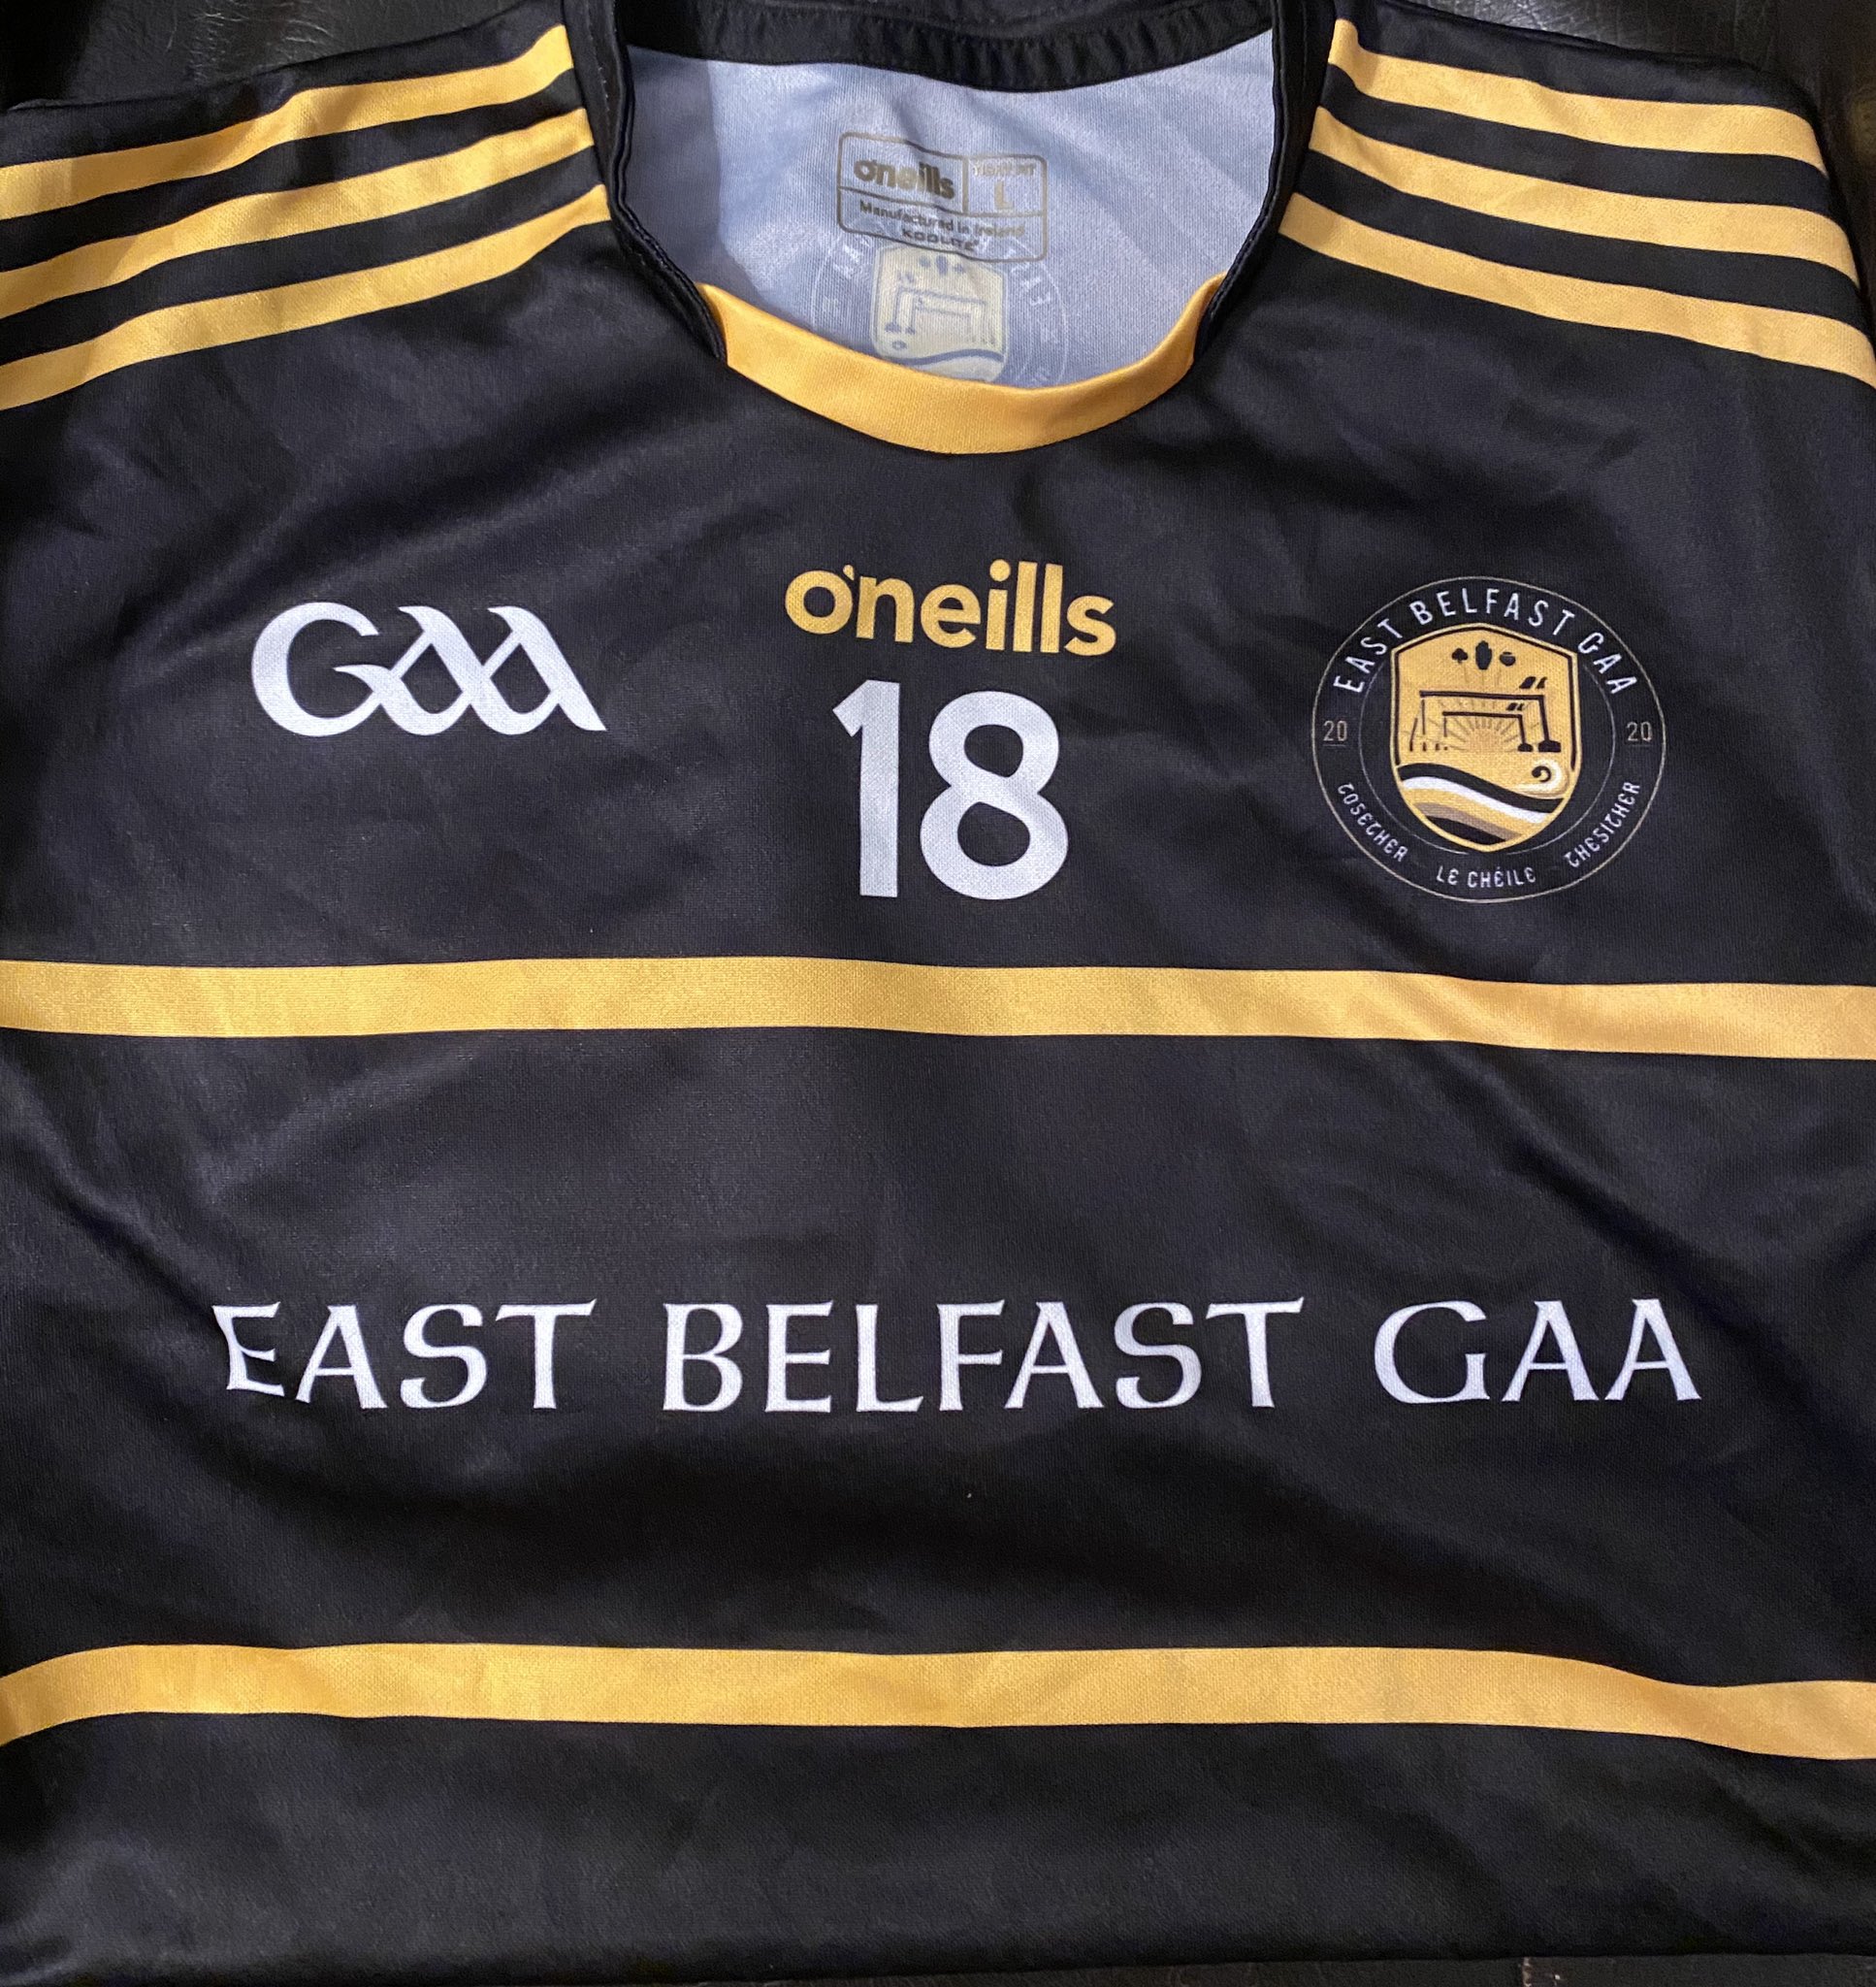 Donal Fallon on Twitter: "Everyone involved in East Belfast GAA should be  proud. The inclusion of Ulster Scots on the jersey is a great touch too.  Looking forward to being able to